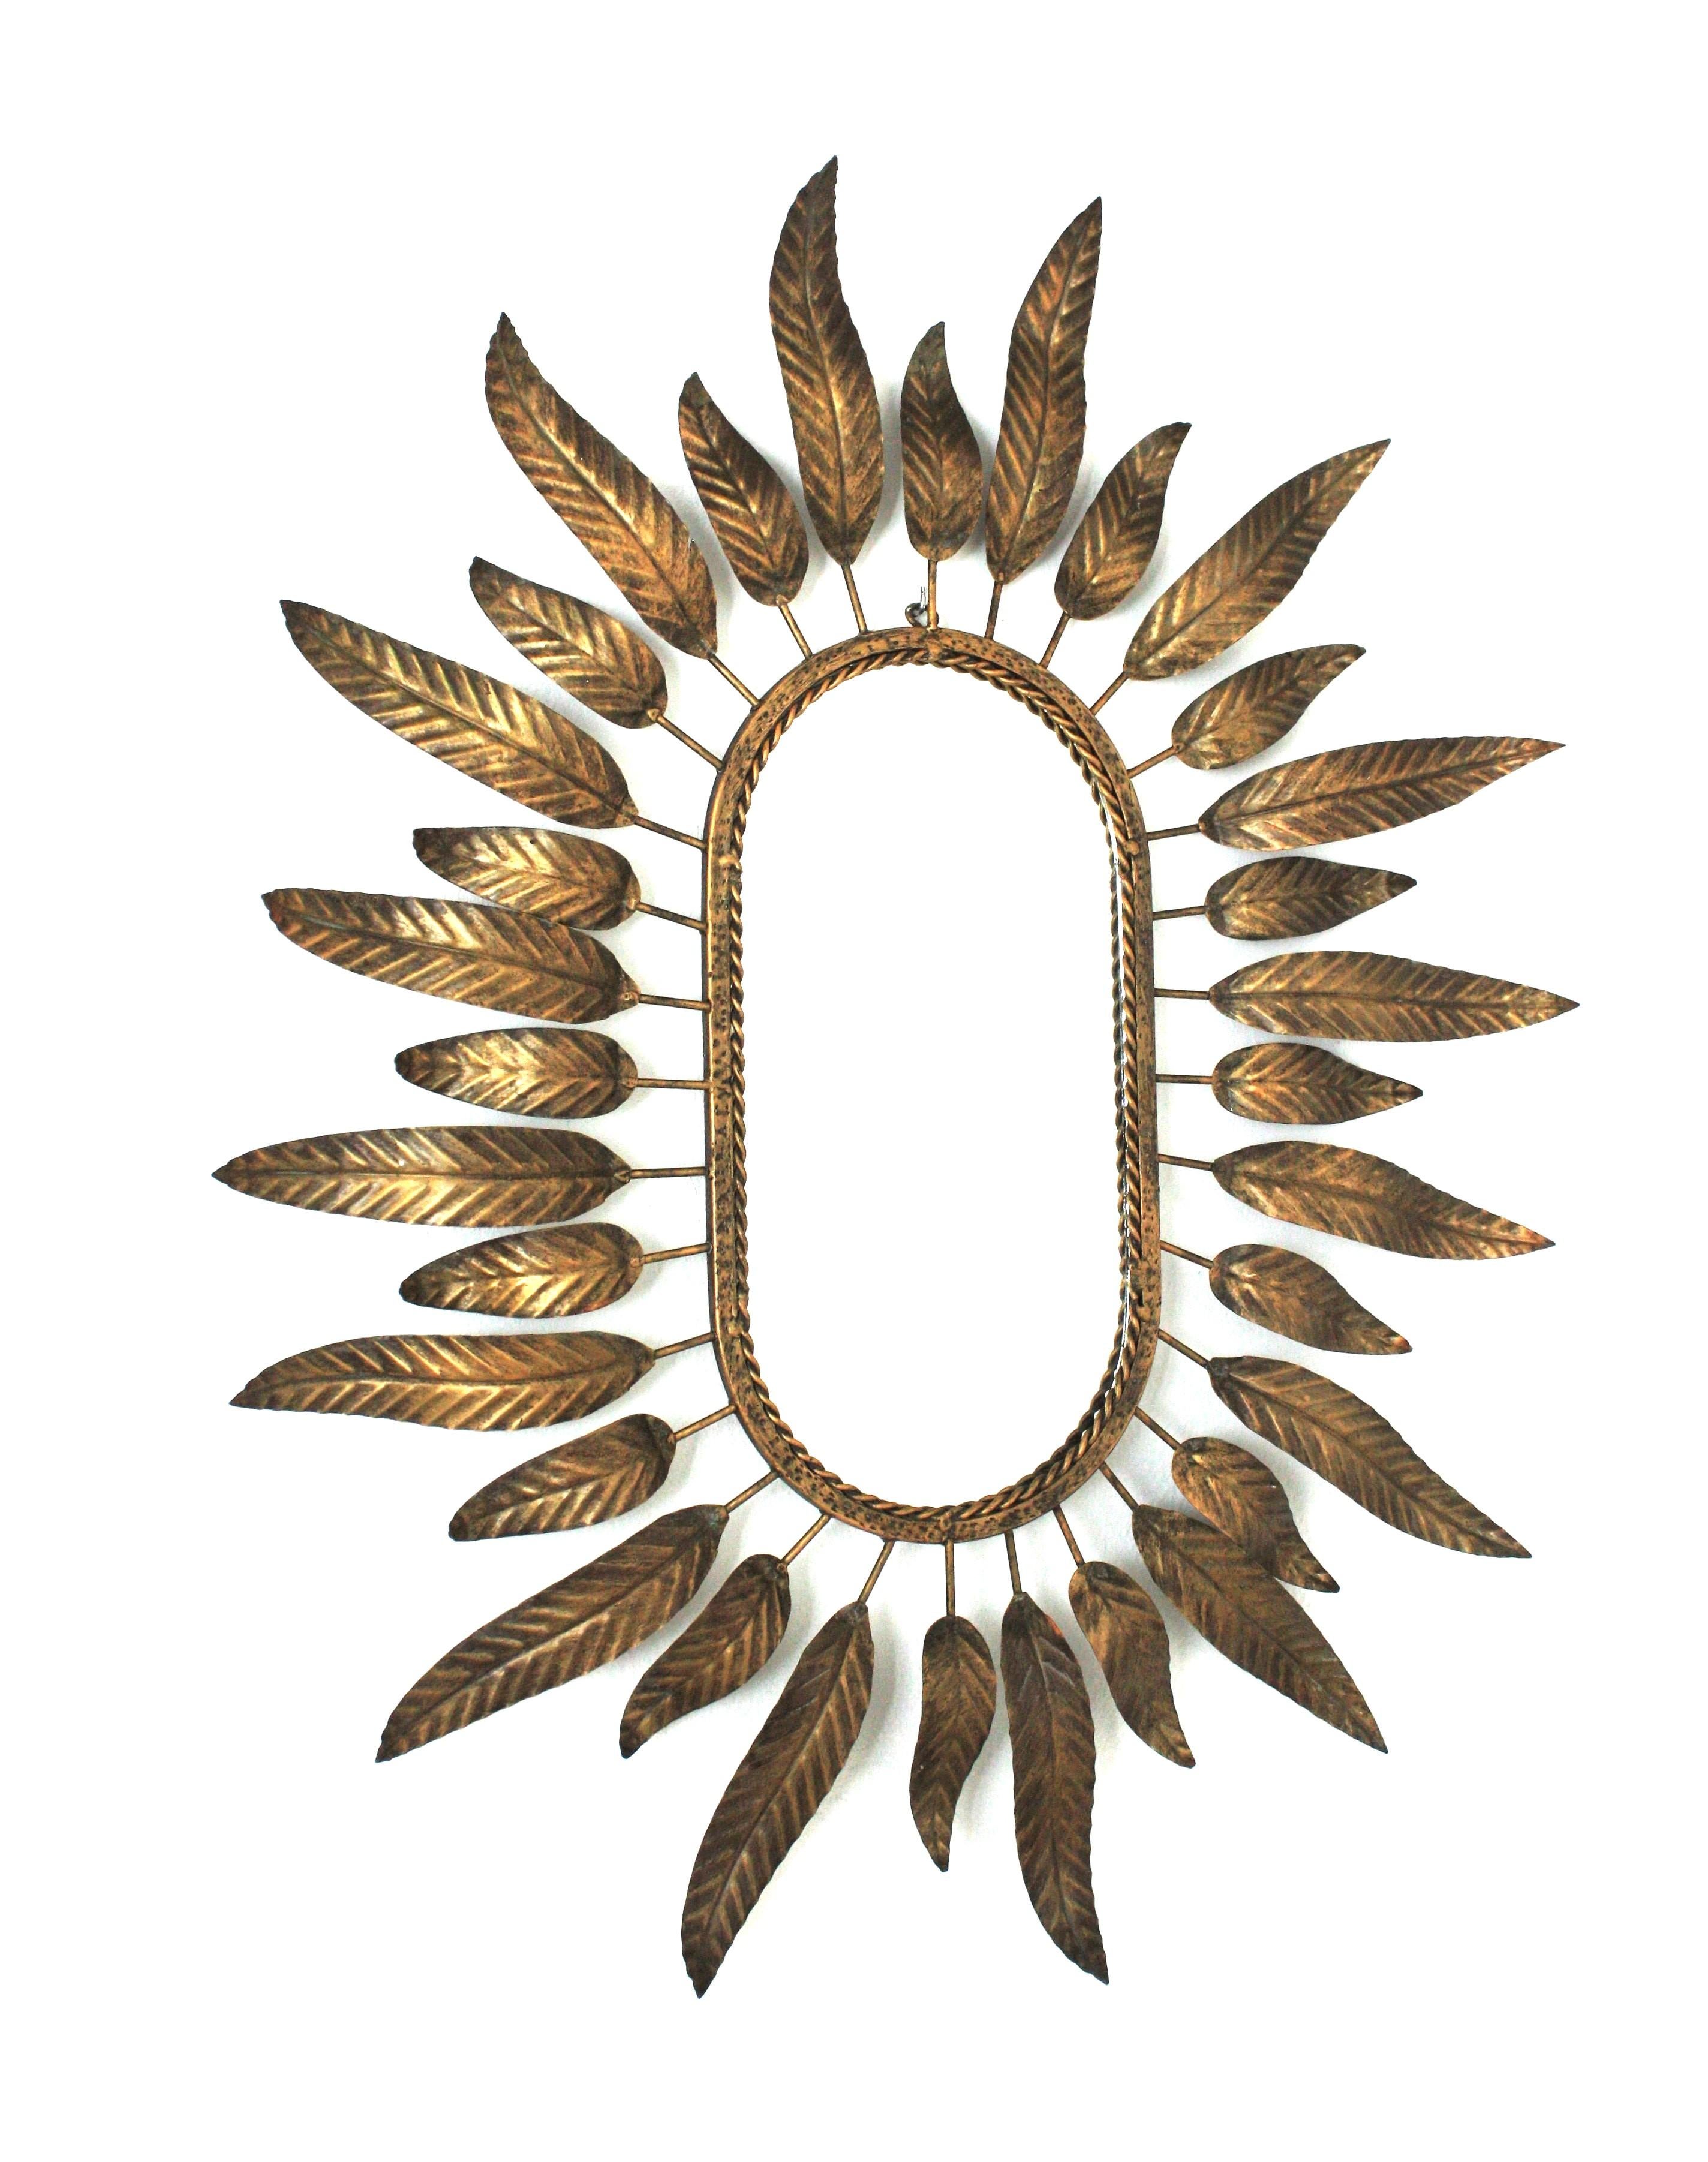 Gilt metal sunburst mirror framed by leaves. Spain, 1950s-1960s.

This stylish mirror combines Midcentury and Hollywood Regency accents.A highly decorative oval sunburst mirror with foliage frame. Elegant curved leaves in two sizes surrounding the